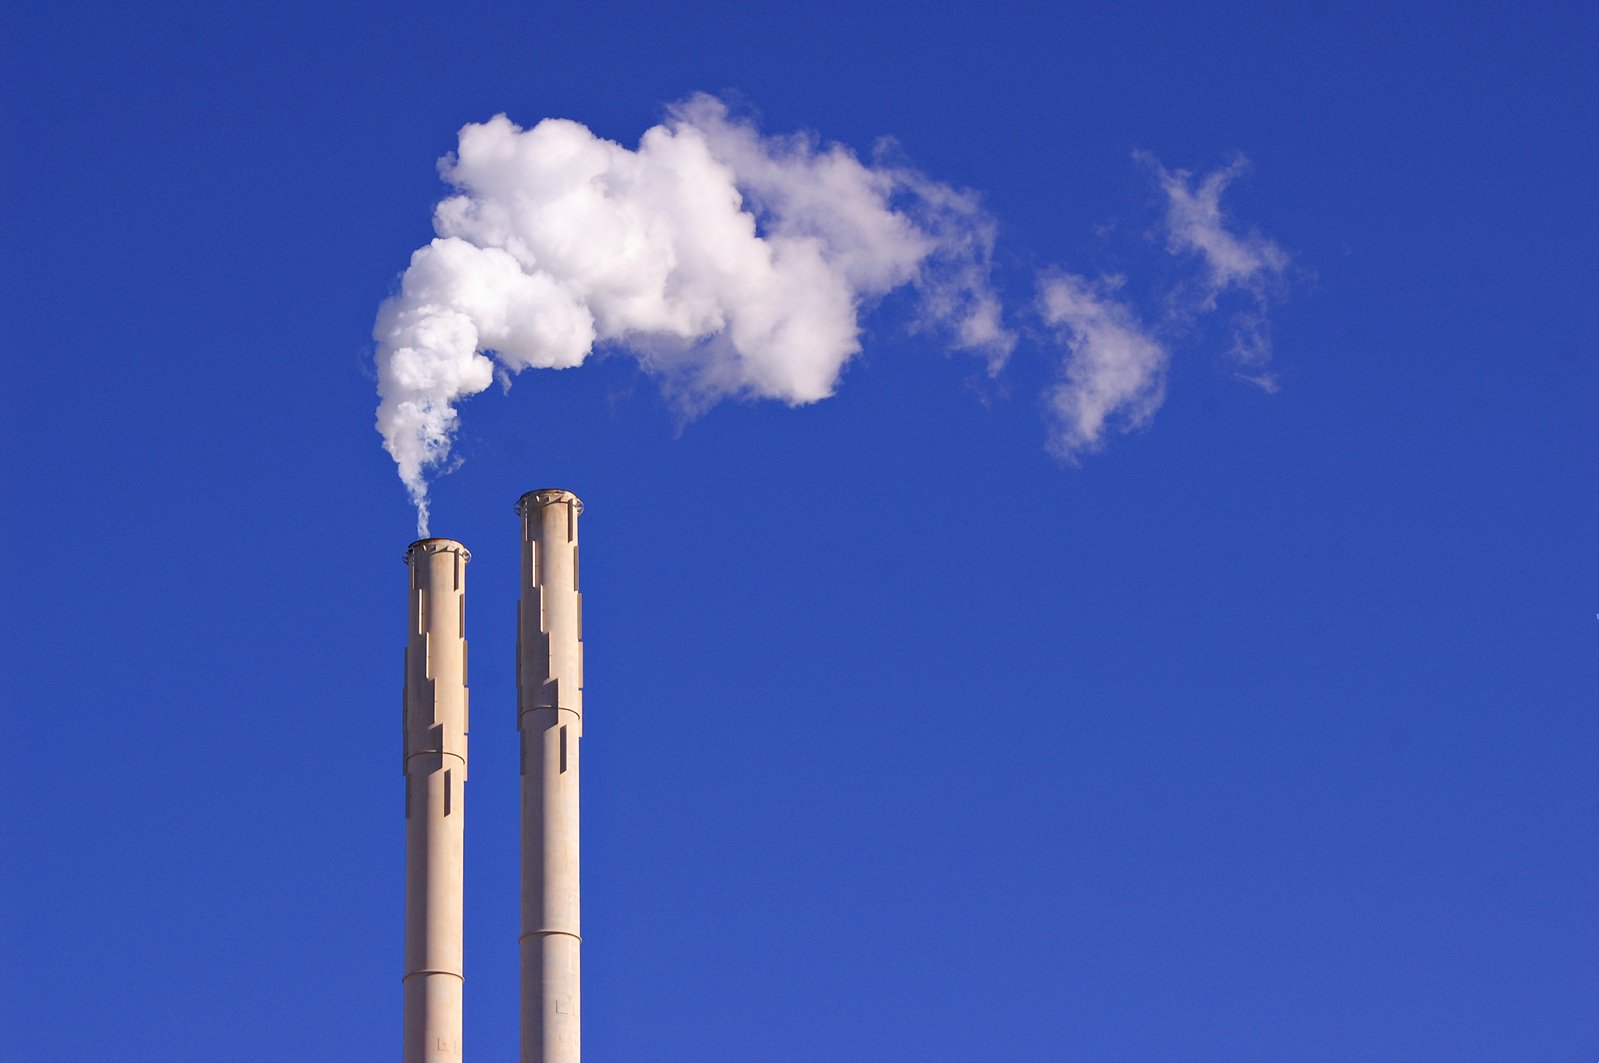 smoke comes out of a factory pipes with bright blue skies in the background